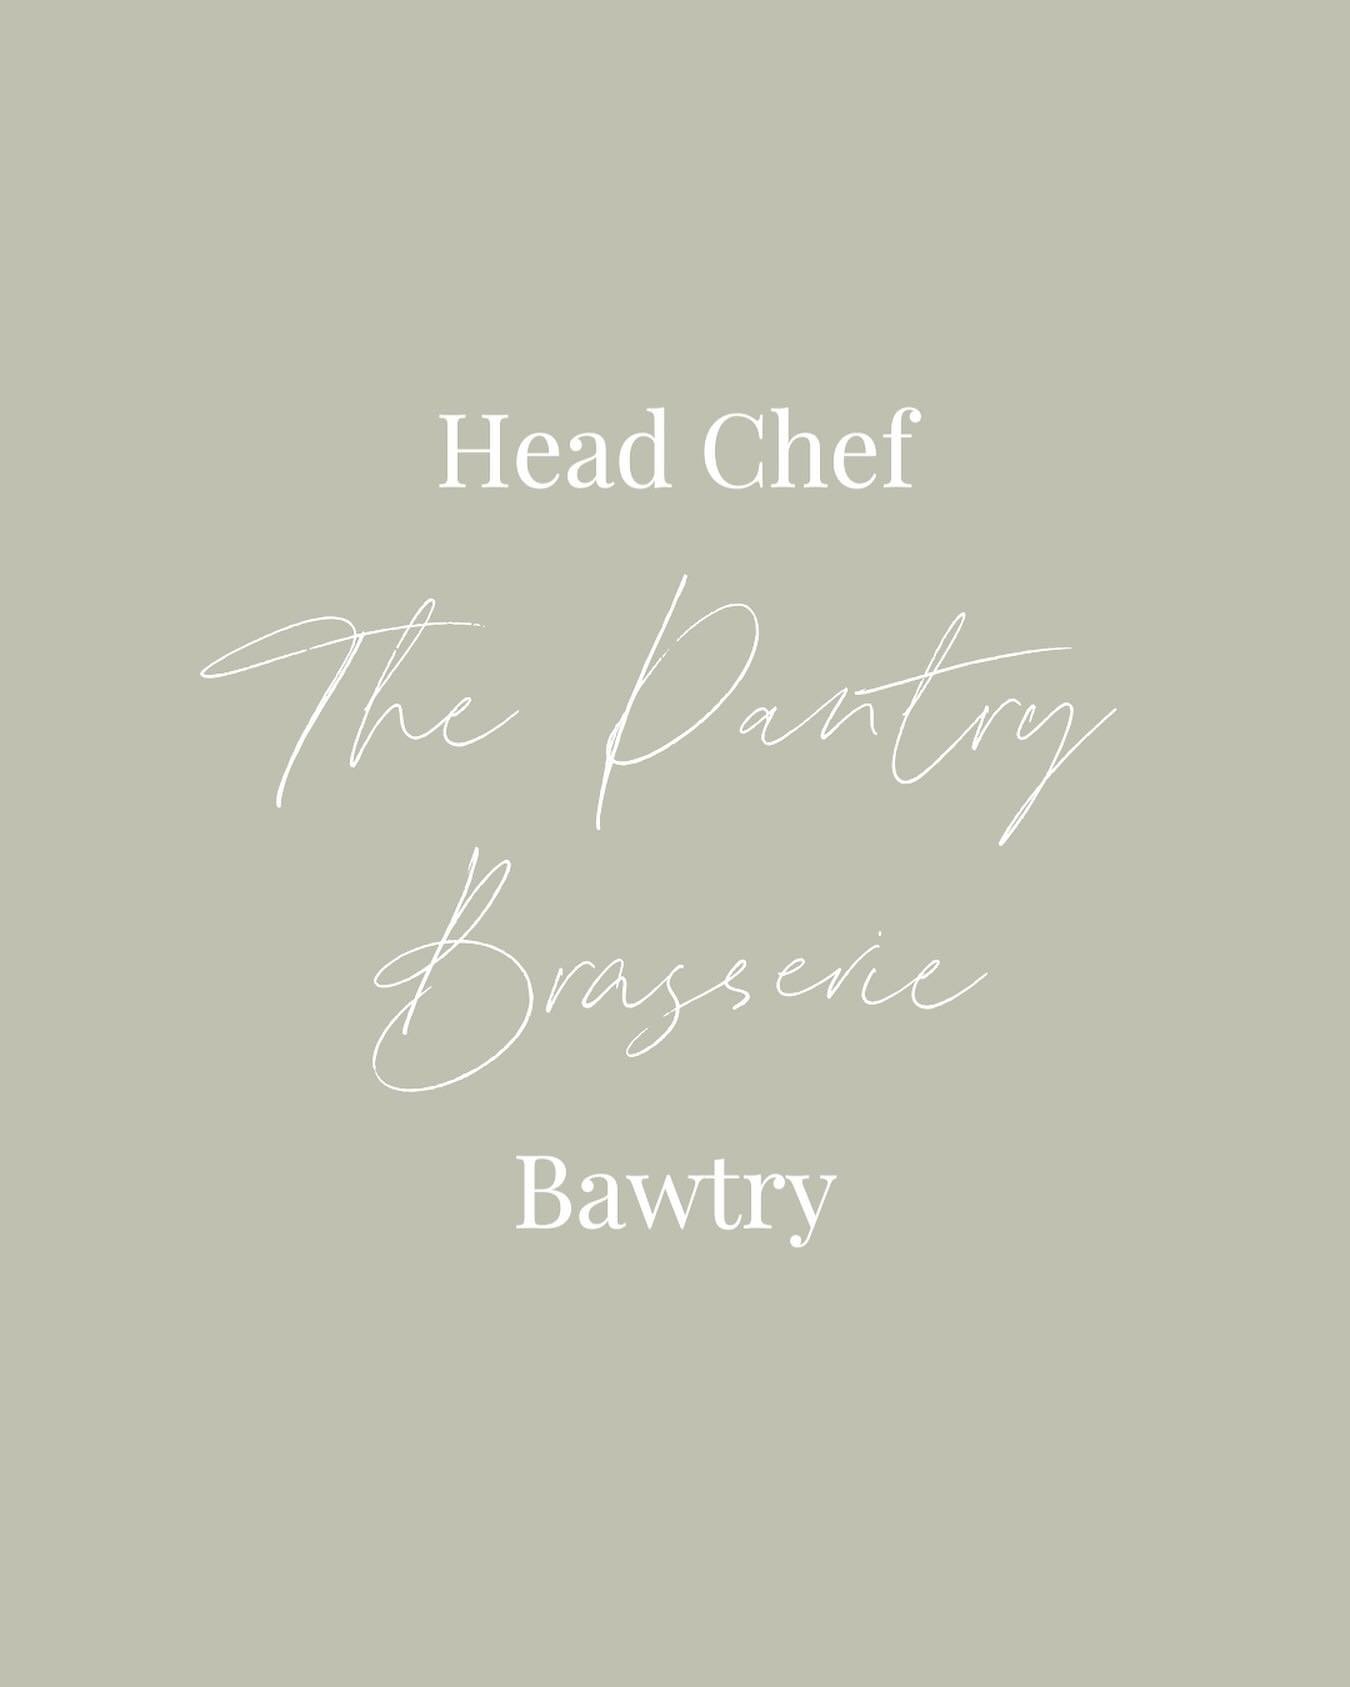 We have been overwhelmed by the response to our announcement for The Brasserie in Bawtry and flooded with interest and CVs. Thank you very much to those who have contacted us and for your patience as our teams are working through all applications.

W